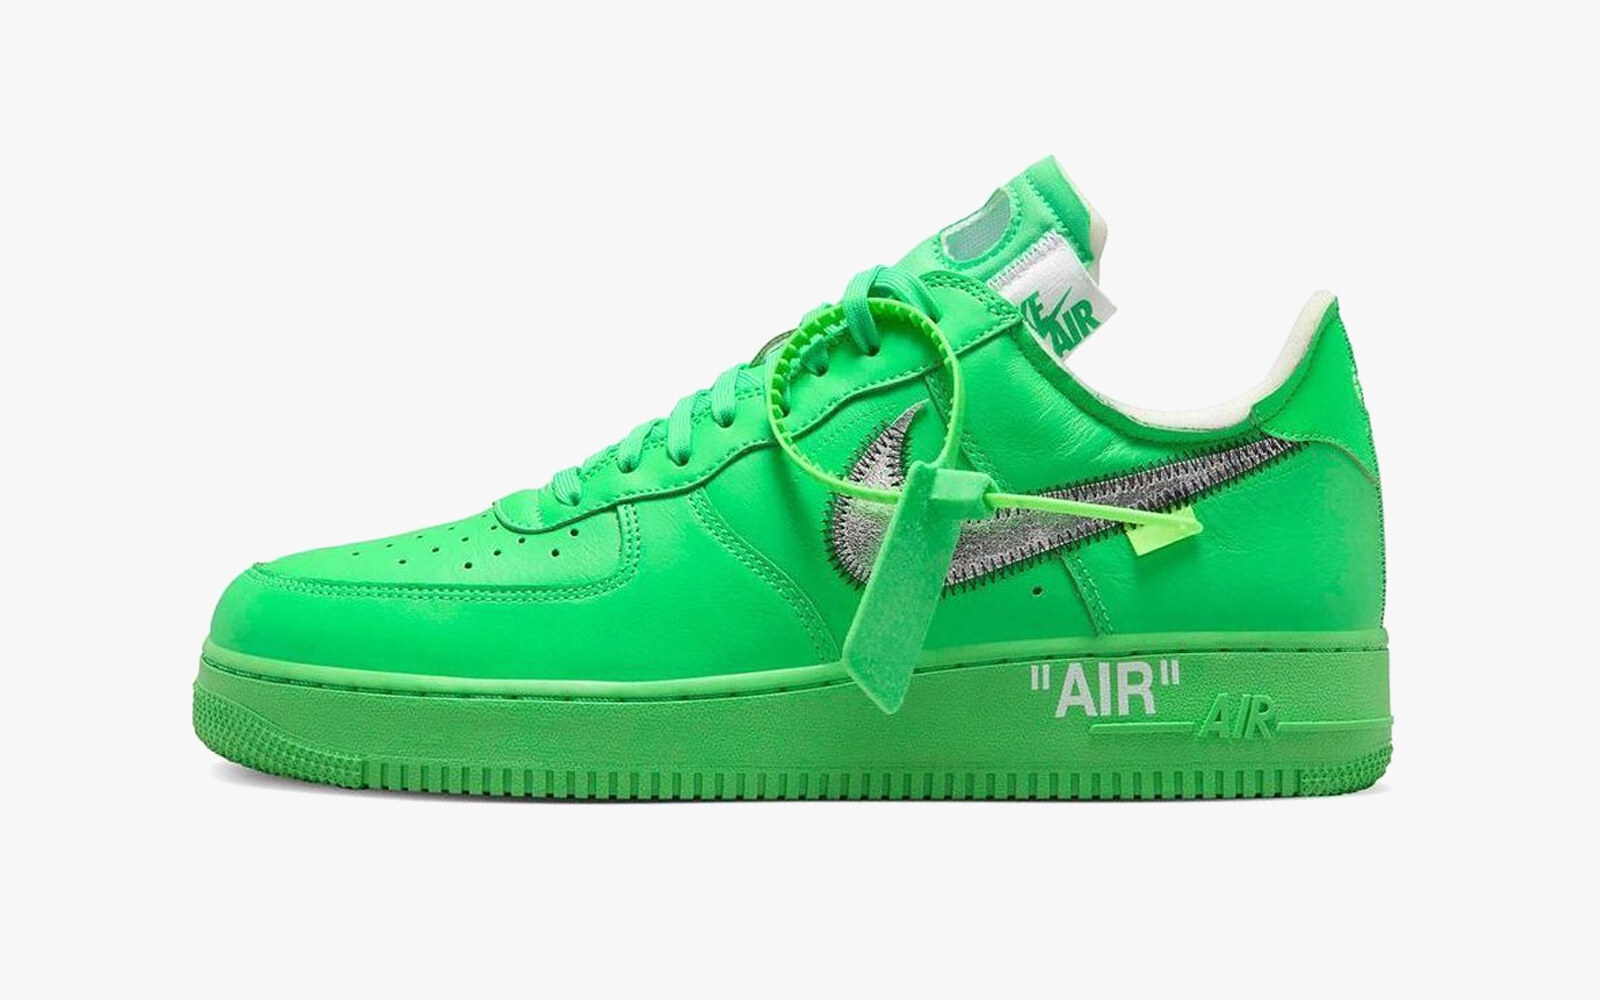 Off-White Nike Air Force 1 Low Green DX1419-300